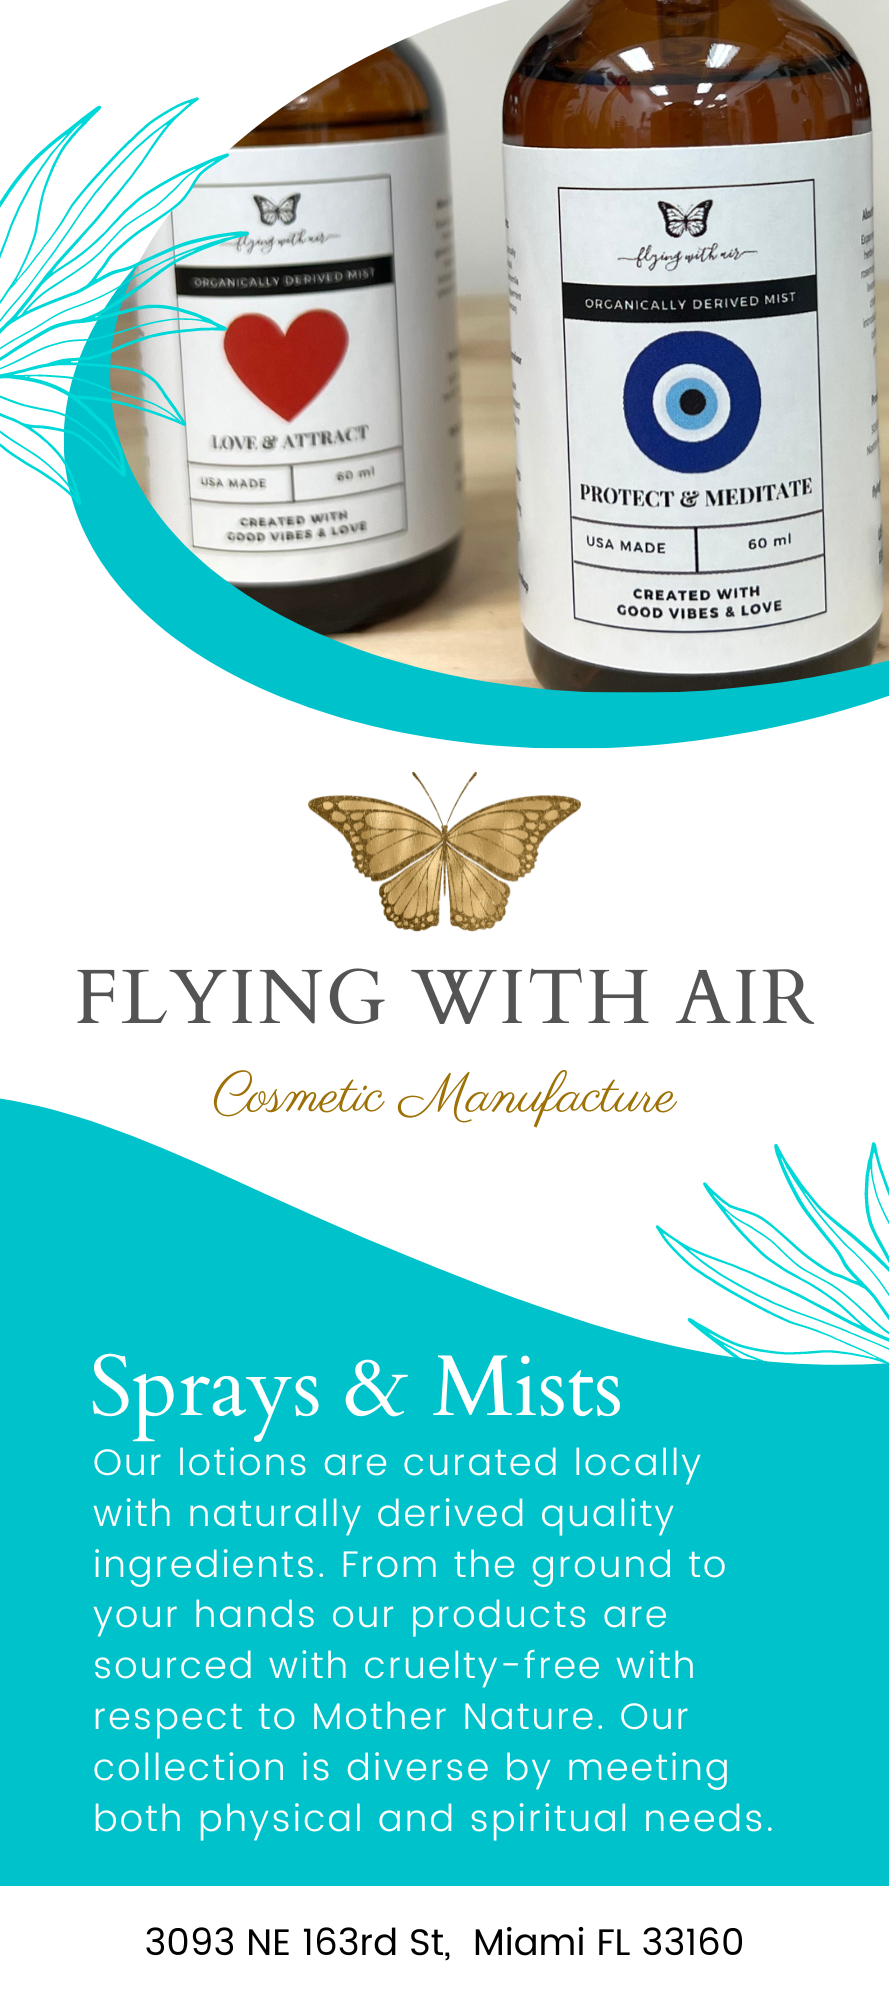 Flying with Air Rack Card Set of 10 - Perfumes & Sprays